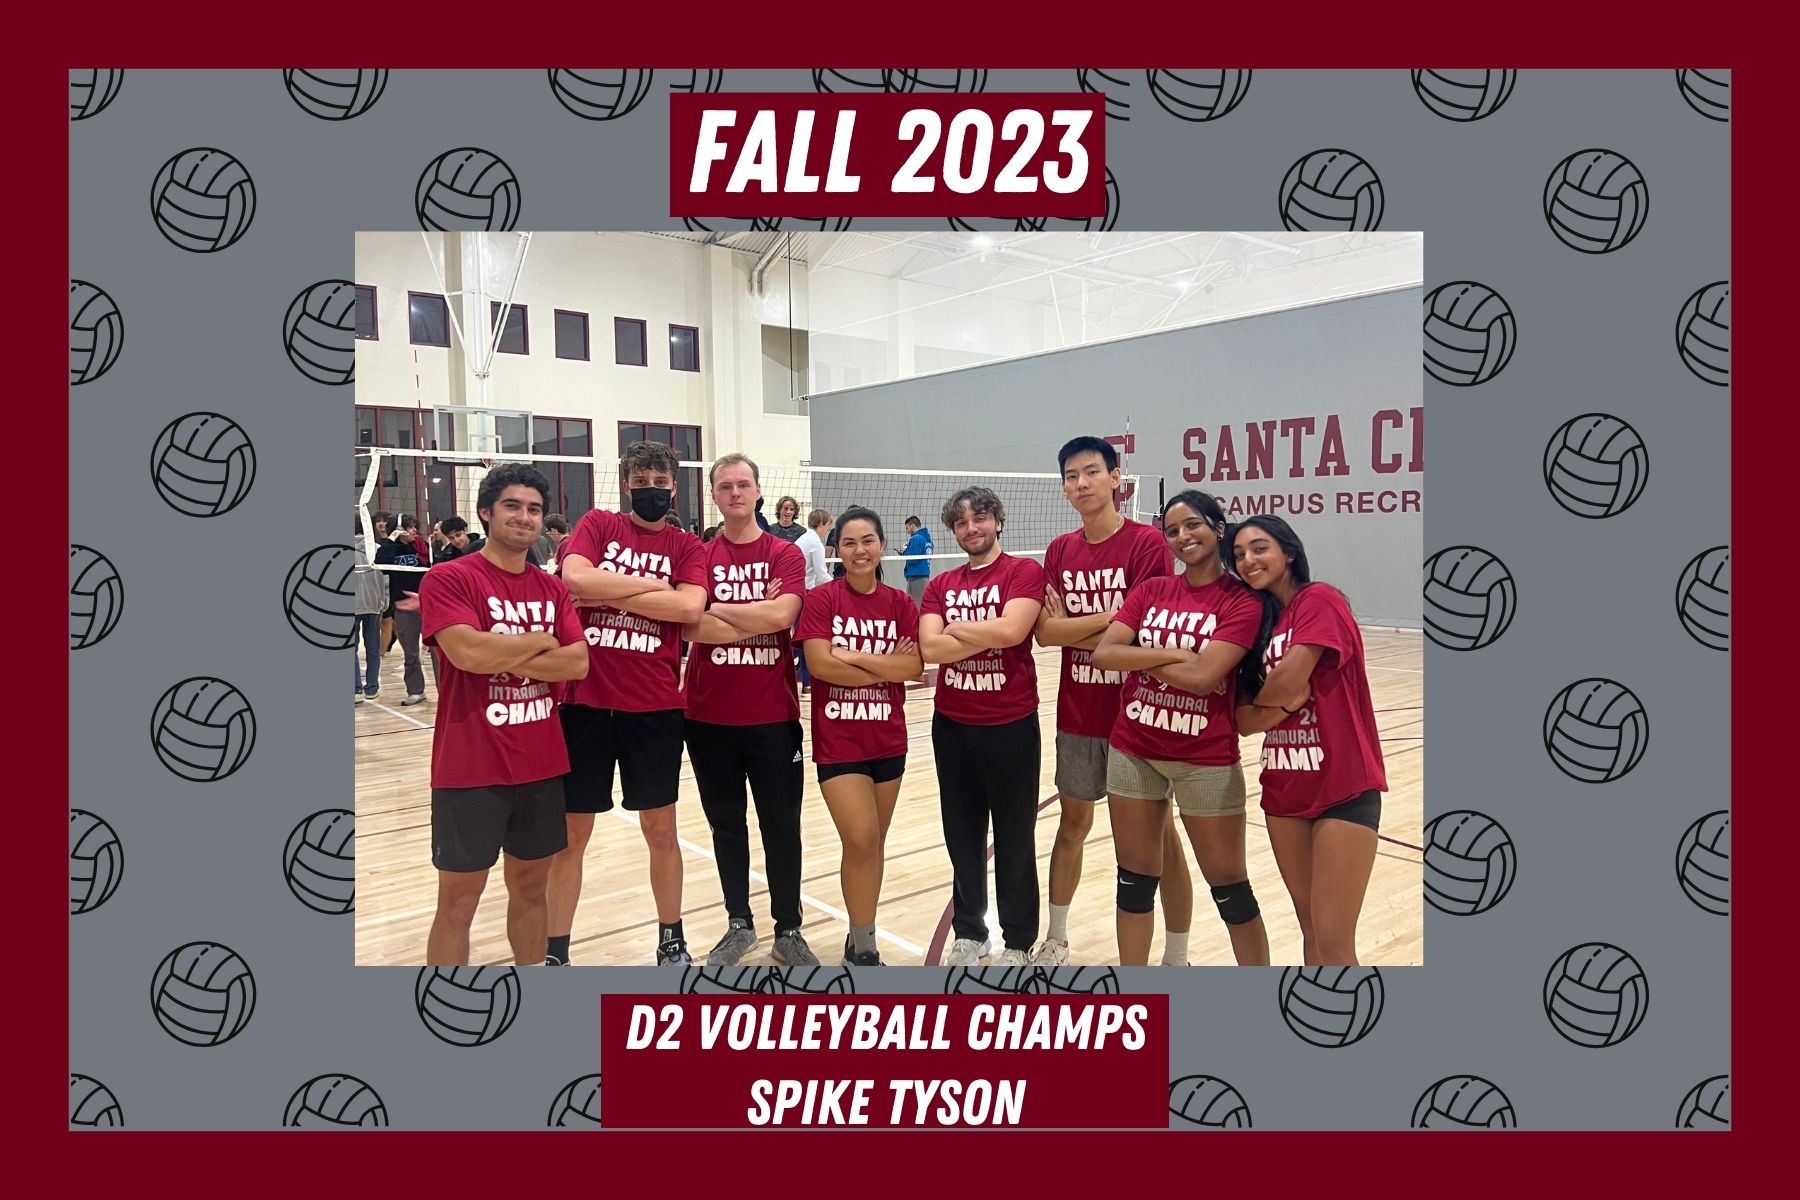 Photo of the D2 IM Volleyball league champs, Spike Tyson, posing with their IM Champion t shirts